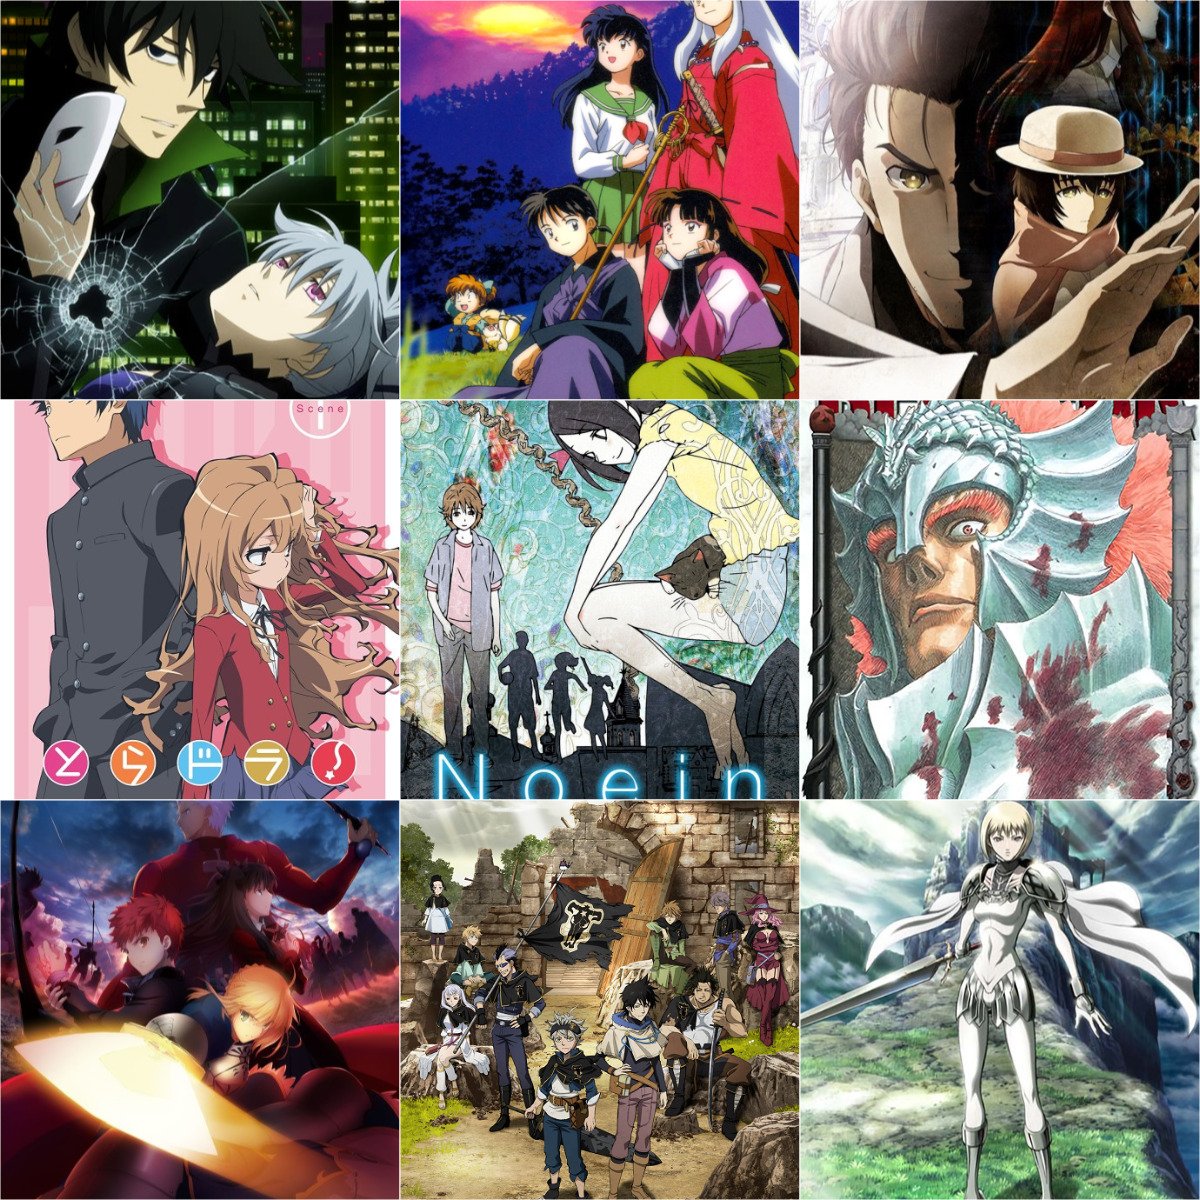 New to anime, recommendations based on my 3x3 would be welcome : r